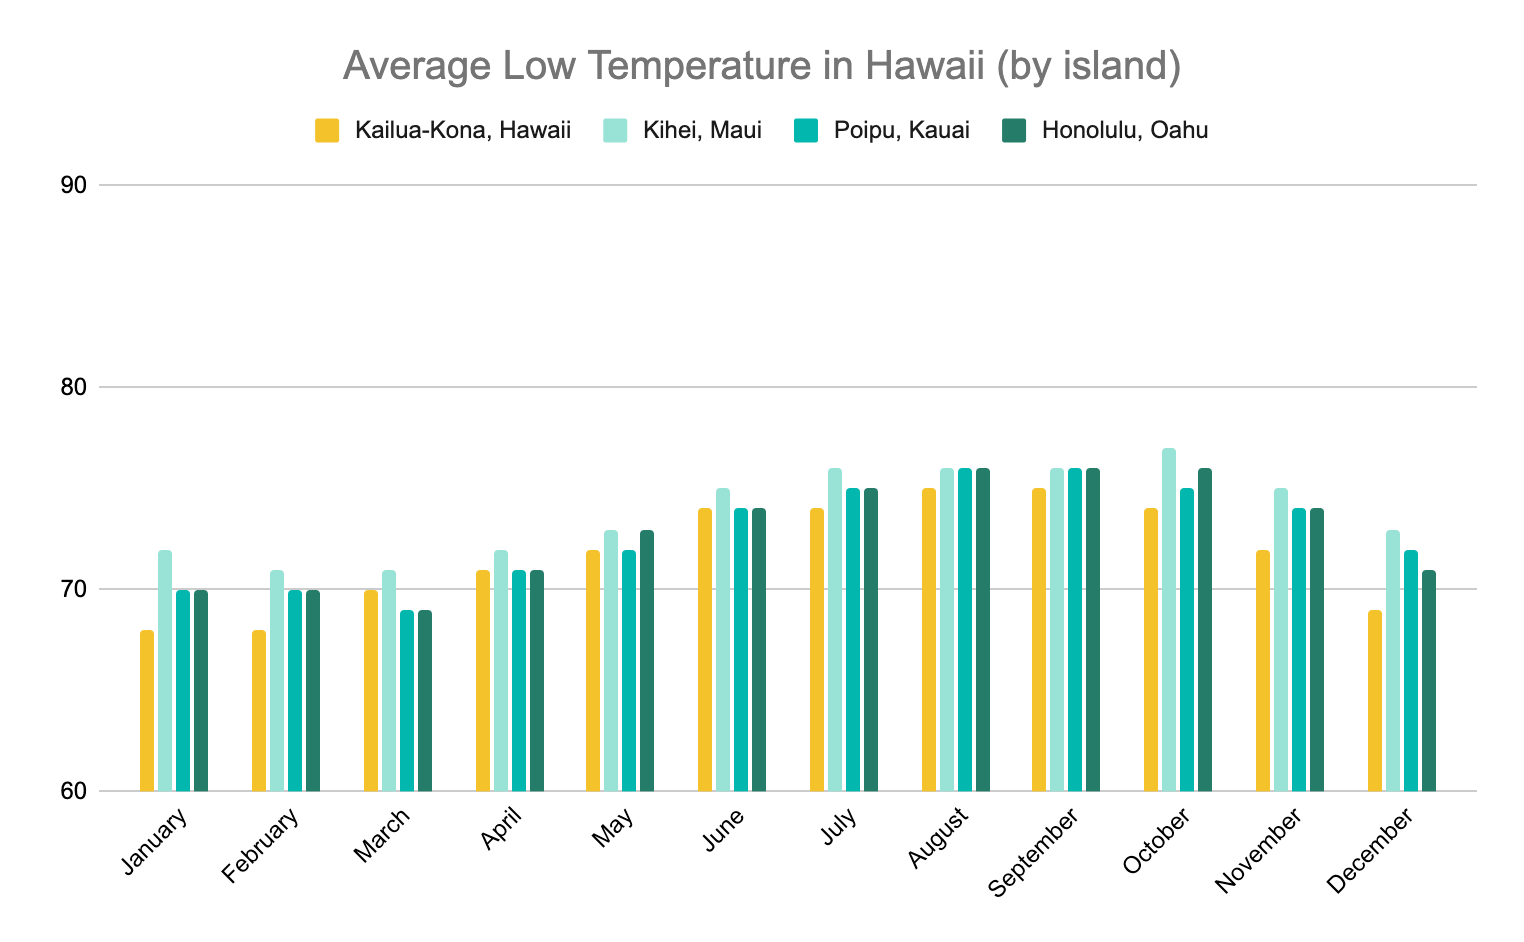 Graph depicting the average low temperatures (Fahrenheit) in Hawaii by island. The Big Island's lows are comparable to the other islands March through September, but are significantly lower October through February.